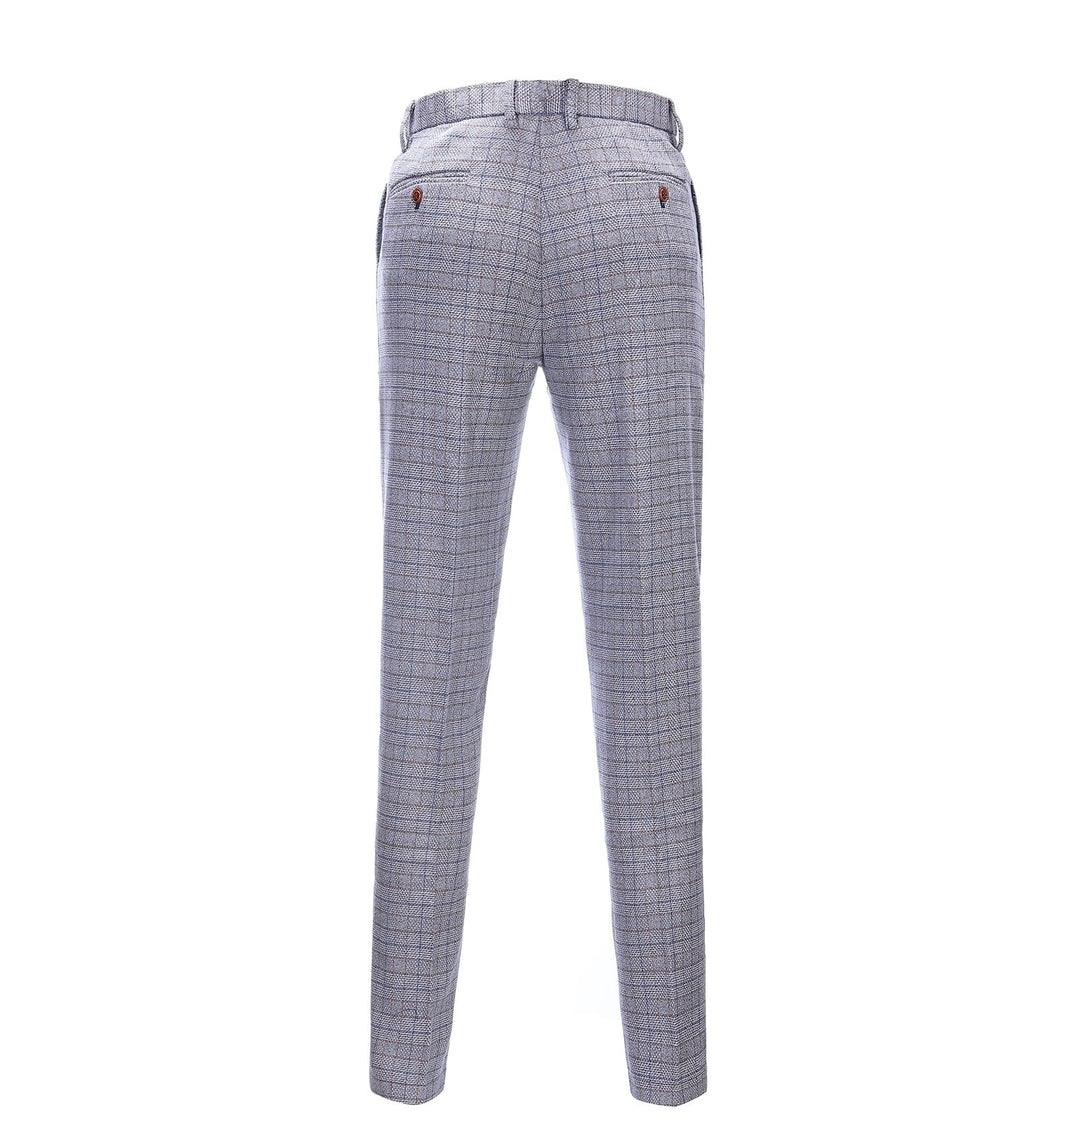 Casual Men's Suit Pants White Houndstooth Pleat-Front Trousers menseventwear